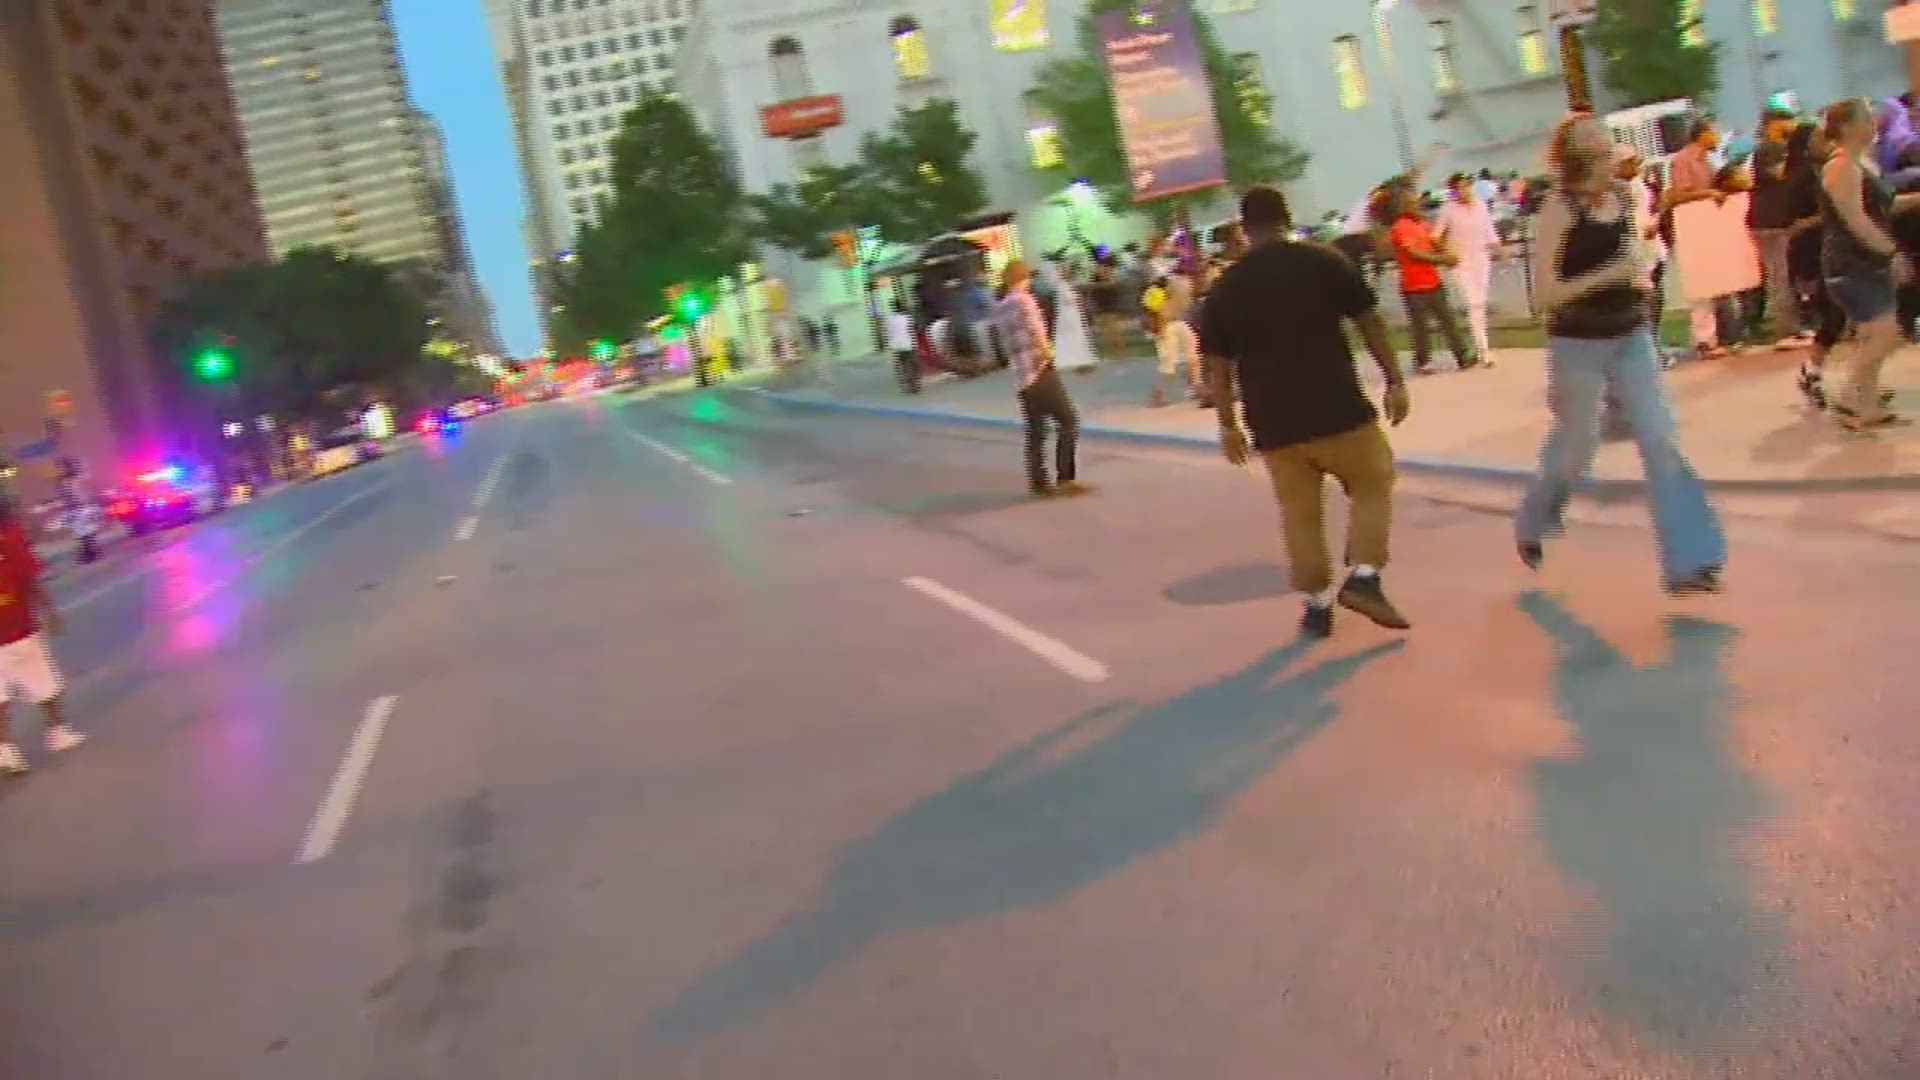 Raw video captured by News 8's Josh Stephen shows the panic that ensued after the first shots were fired at a Dallas protest Thursday night.